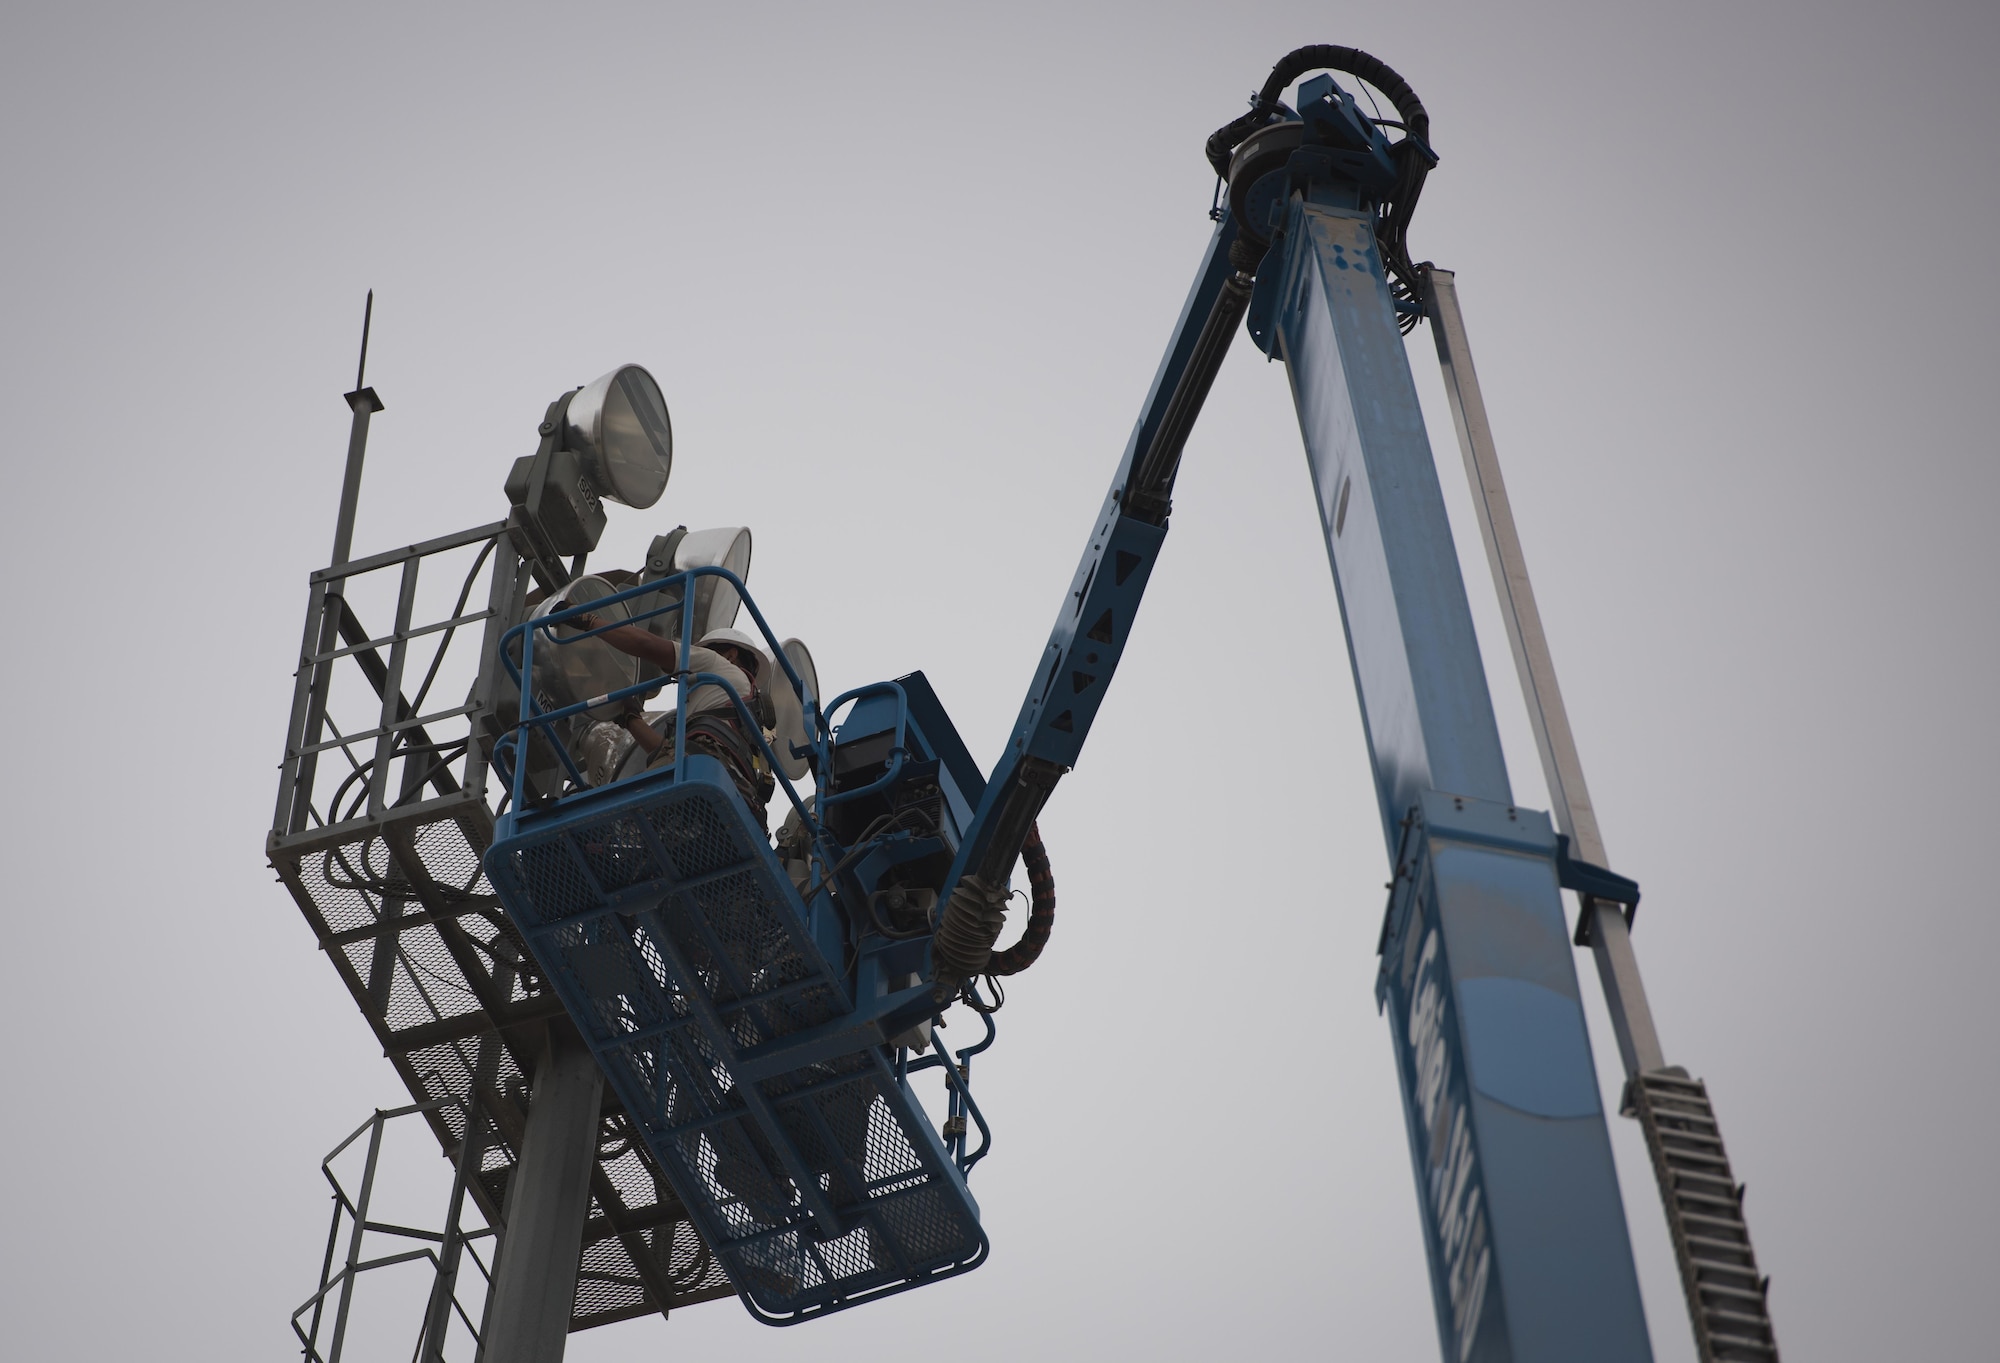 Airmen from the 455th Expeditionary Civil Engineer Squadron replace an airfield light at Bagram Airfield, Afghanistan, May 12, 2017. Engineers perform an inherently dangerous job, on top of the risks of being military members in a combat zone, some jobs also require them to go to great heights or work with malfunctioning equipment. In order to prevent injuries, engineers and all Airmen receive education and training on proper safety measures. (U.S. Air Force photo by Airman 1st Class BrieAnna Stillman)